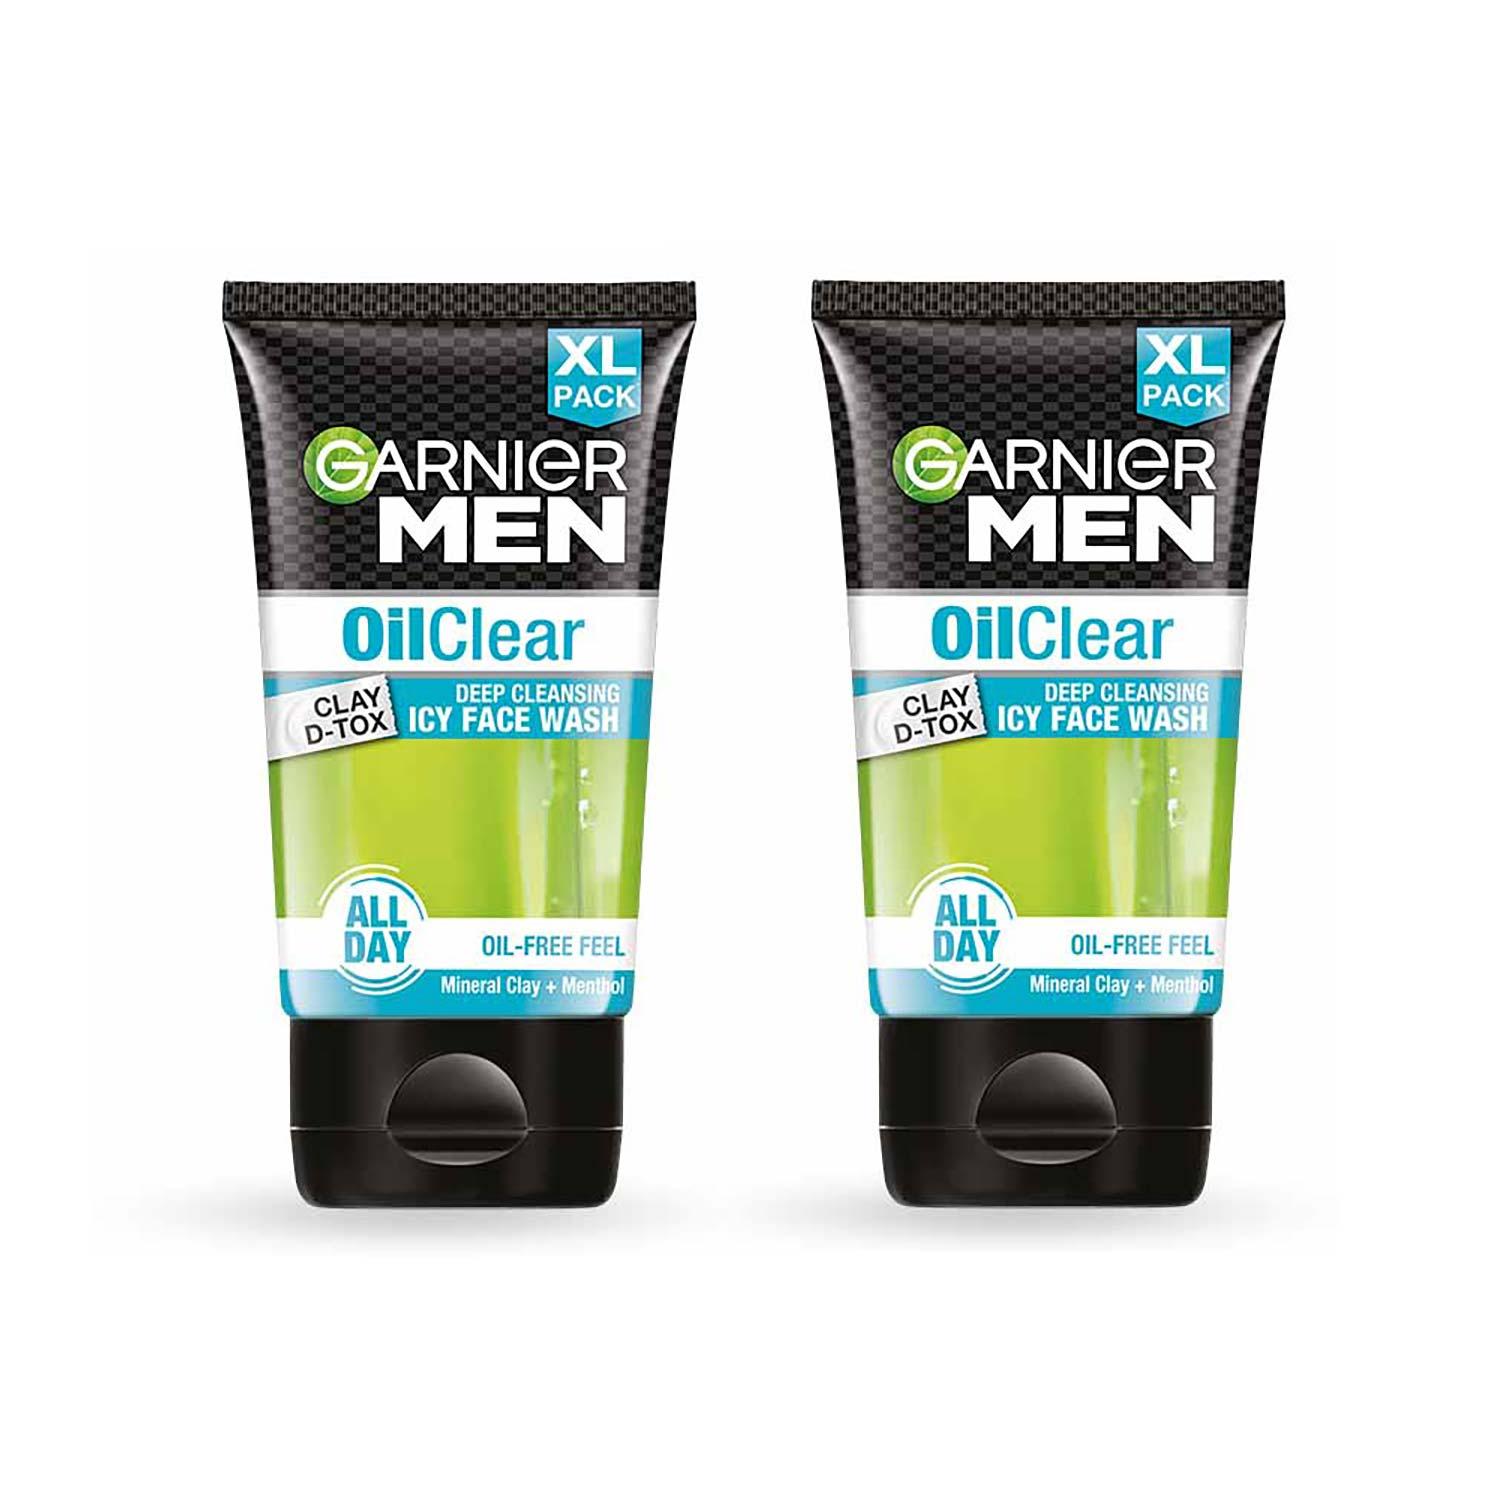 Garnier | Garnier Men Oil Clear Face Wash, Clay D-Tox Deep Cleansing Icy Face Wash for Oily Skin (Pack of 2)